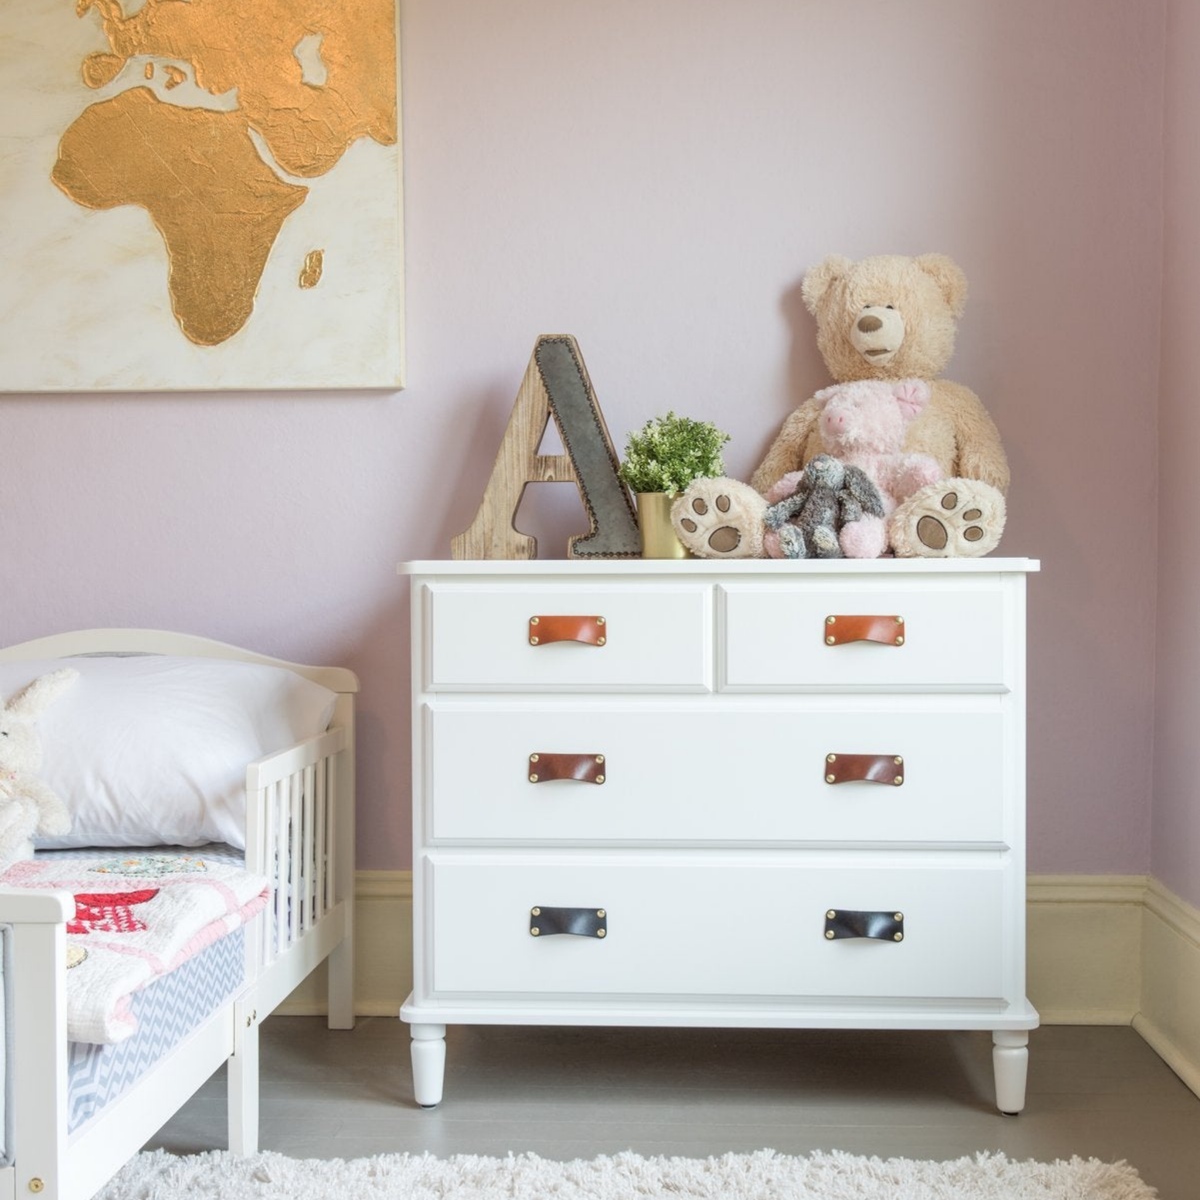 Children&#39;s nursery with natural leather bin pulls on clean white furniture. A large teddy bear sits on top of the chest of drawers and the walls are painted a pastel purple with gold accents. 